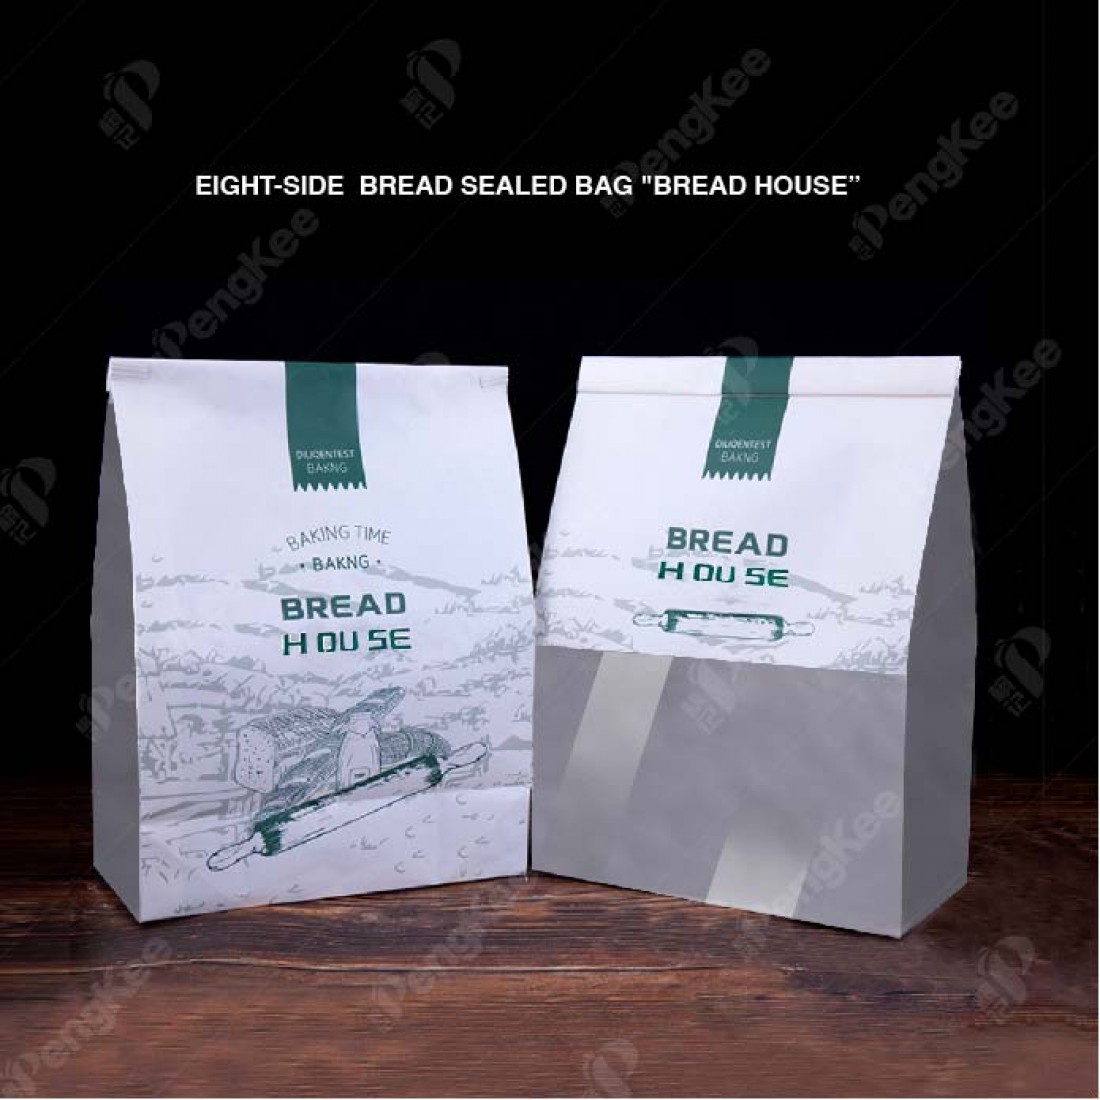 EIGHT-SIDE  BREAD SEALED BAG "BREAD HOUSE"